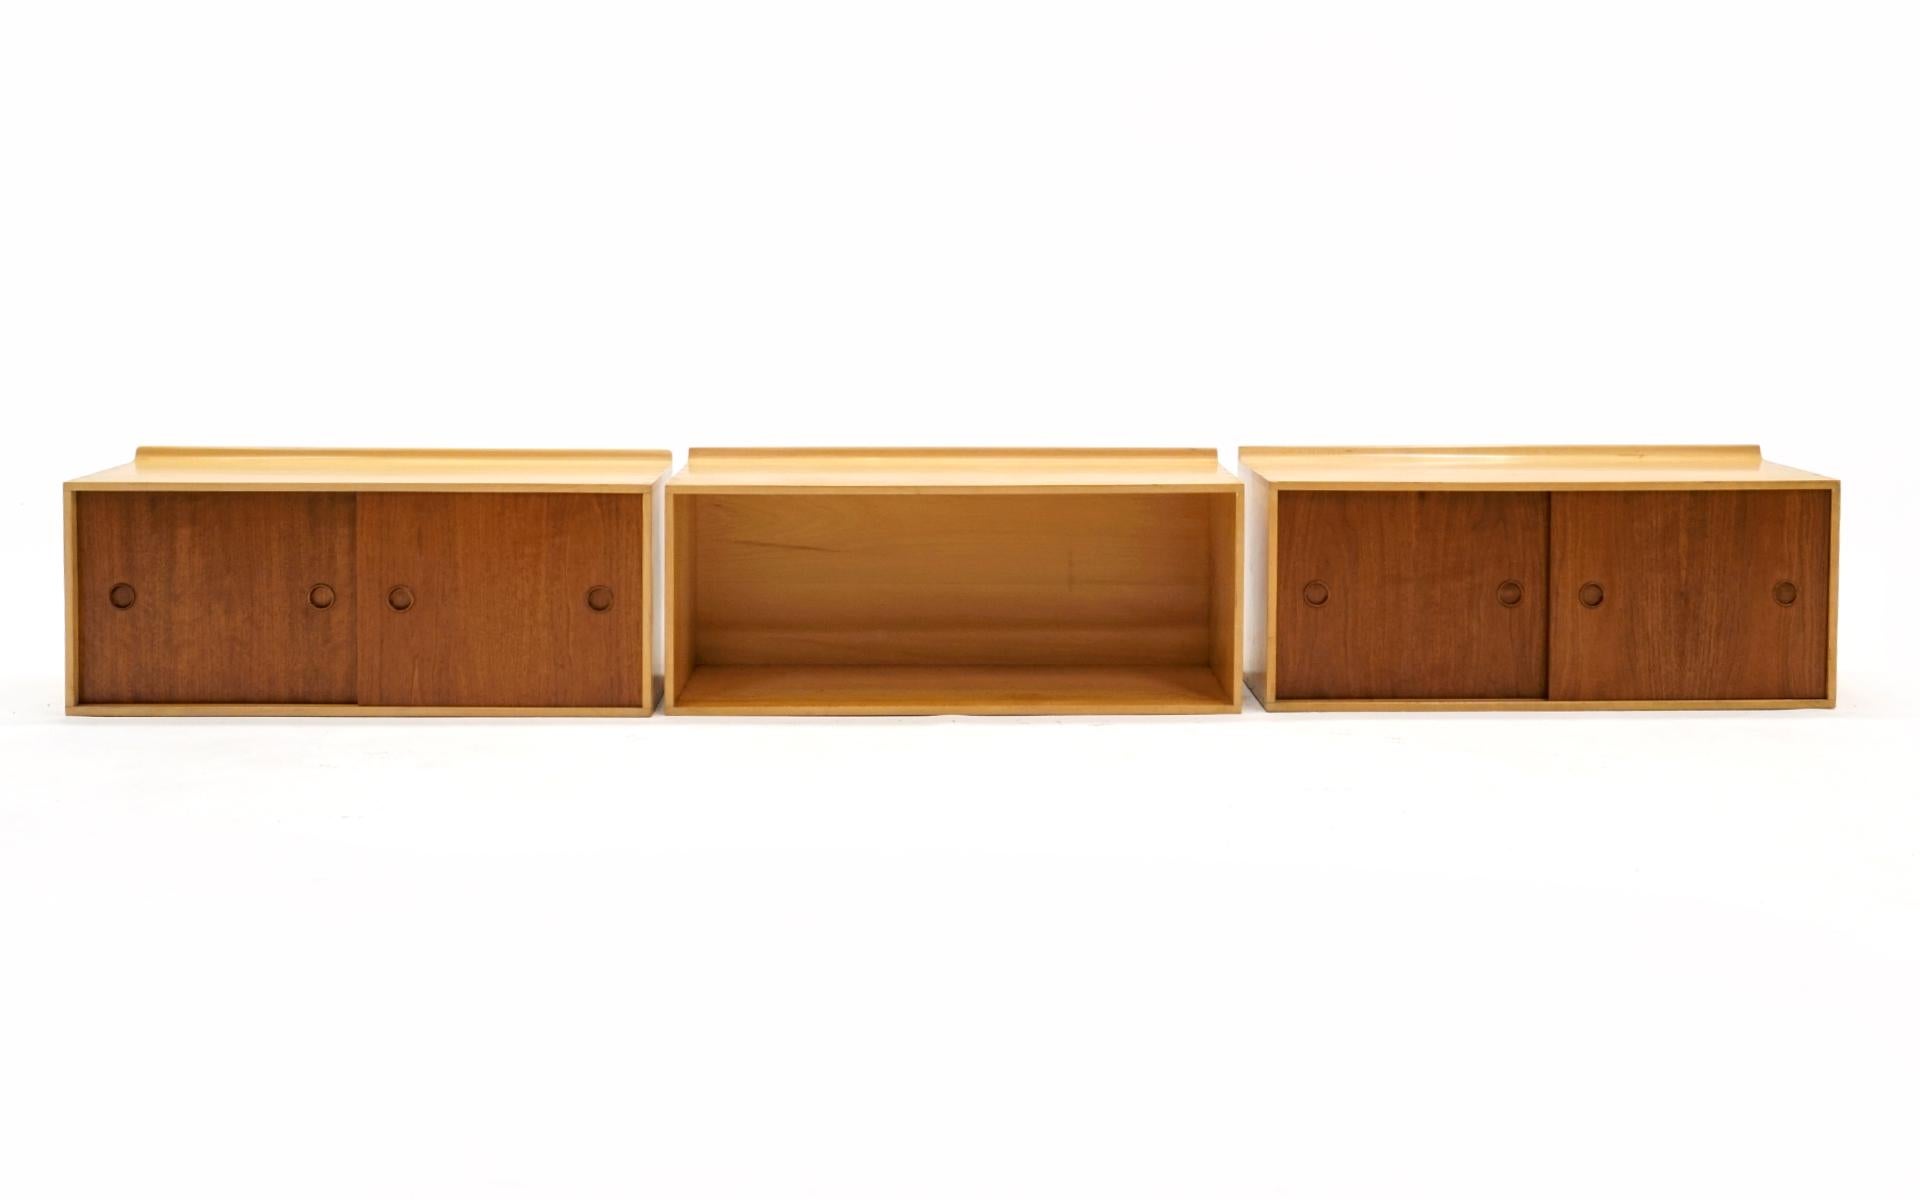 Wall Mounted Cabinets by Finn Juhl for Baker, Walnut and Birch, Great Condition For Sale 6